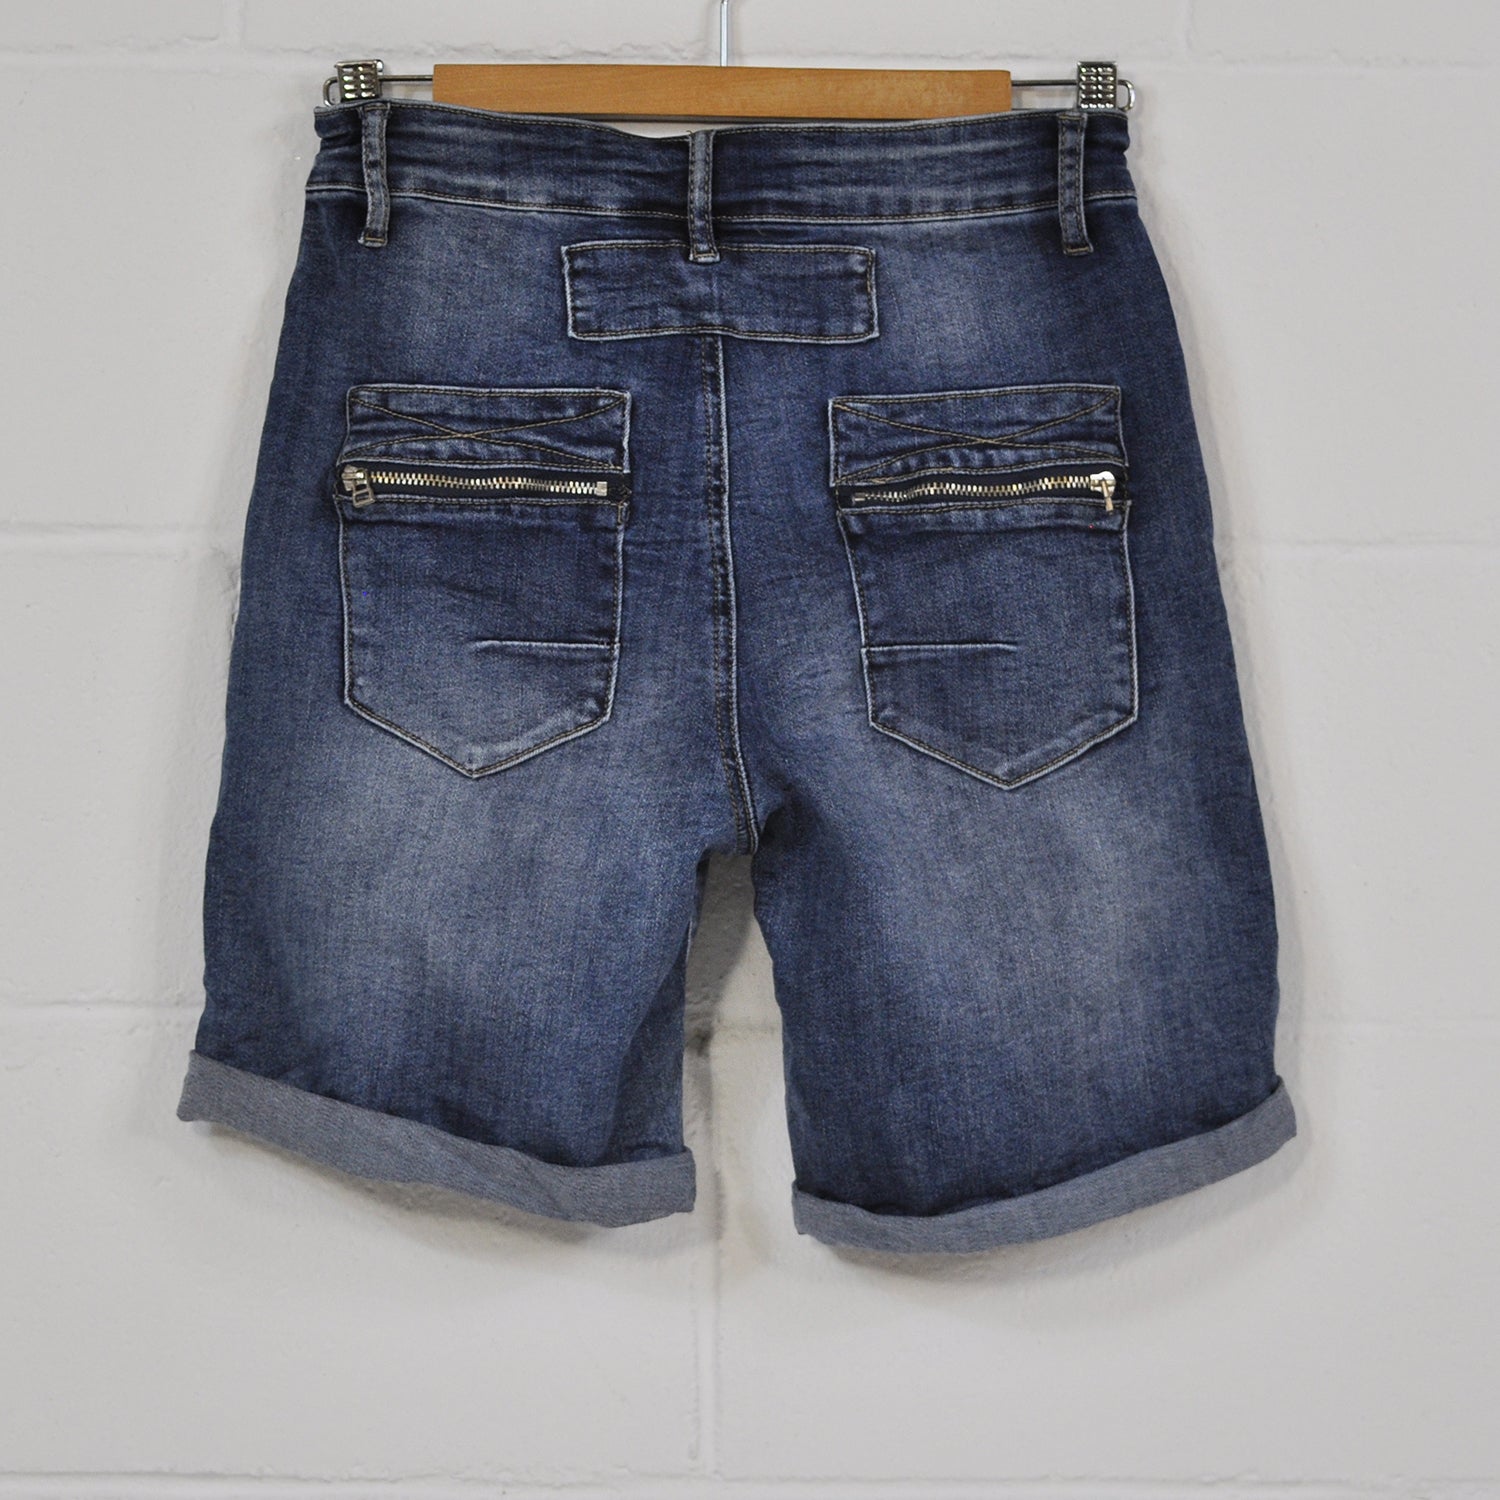 Denim zip and buttons shorts